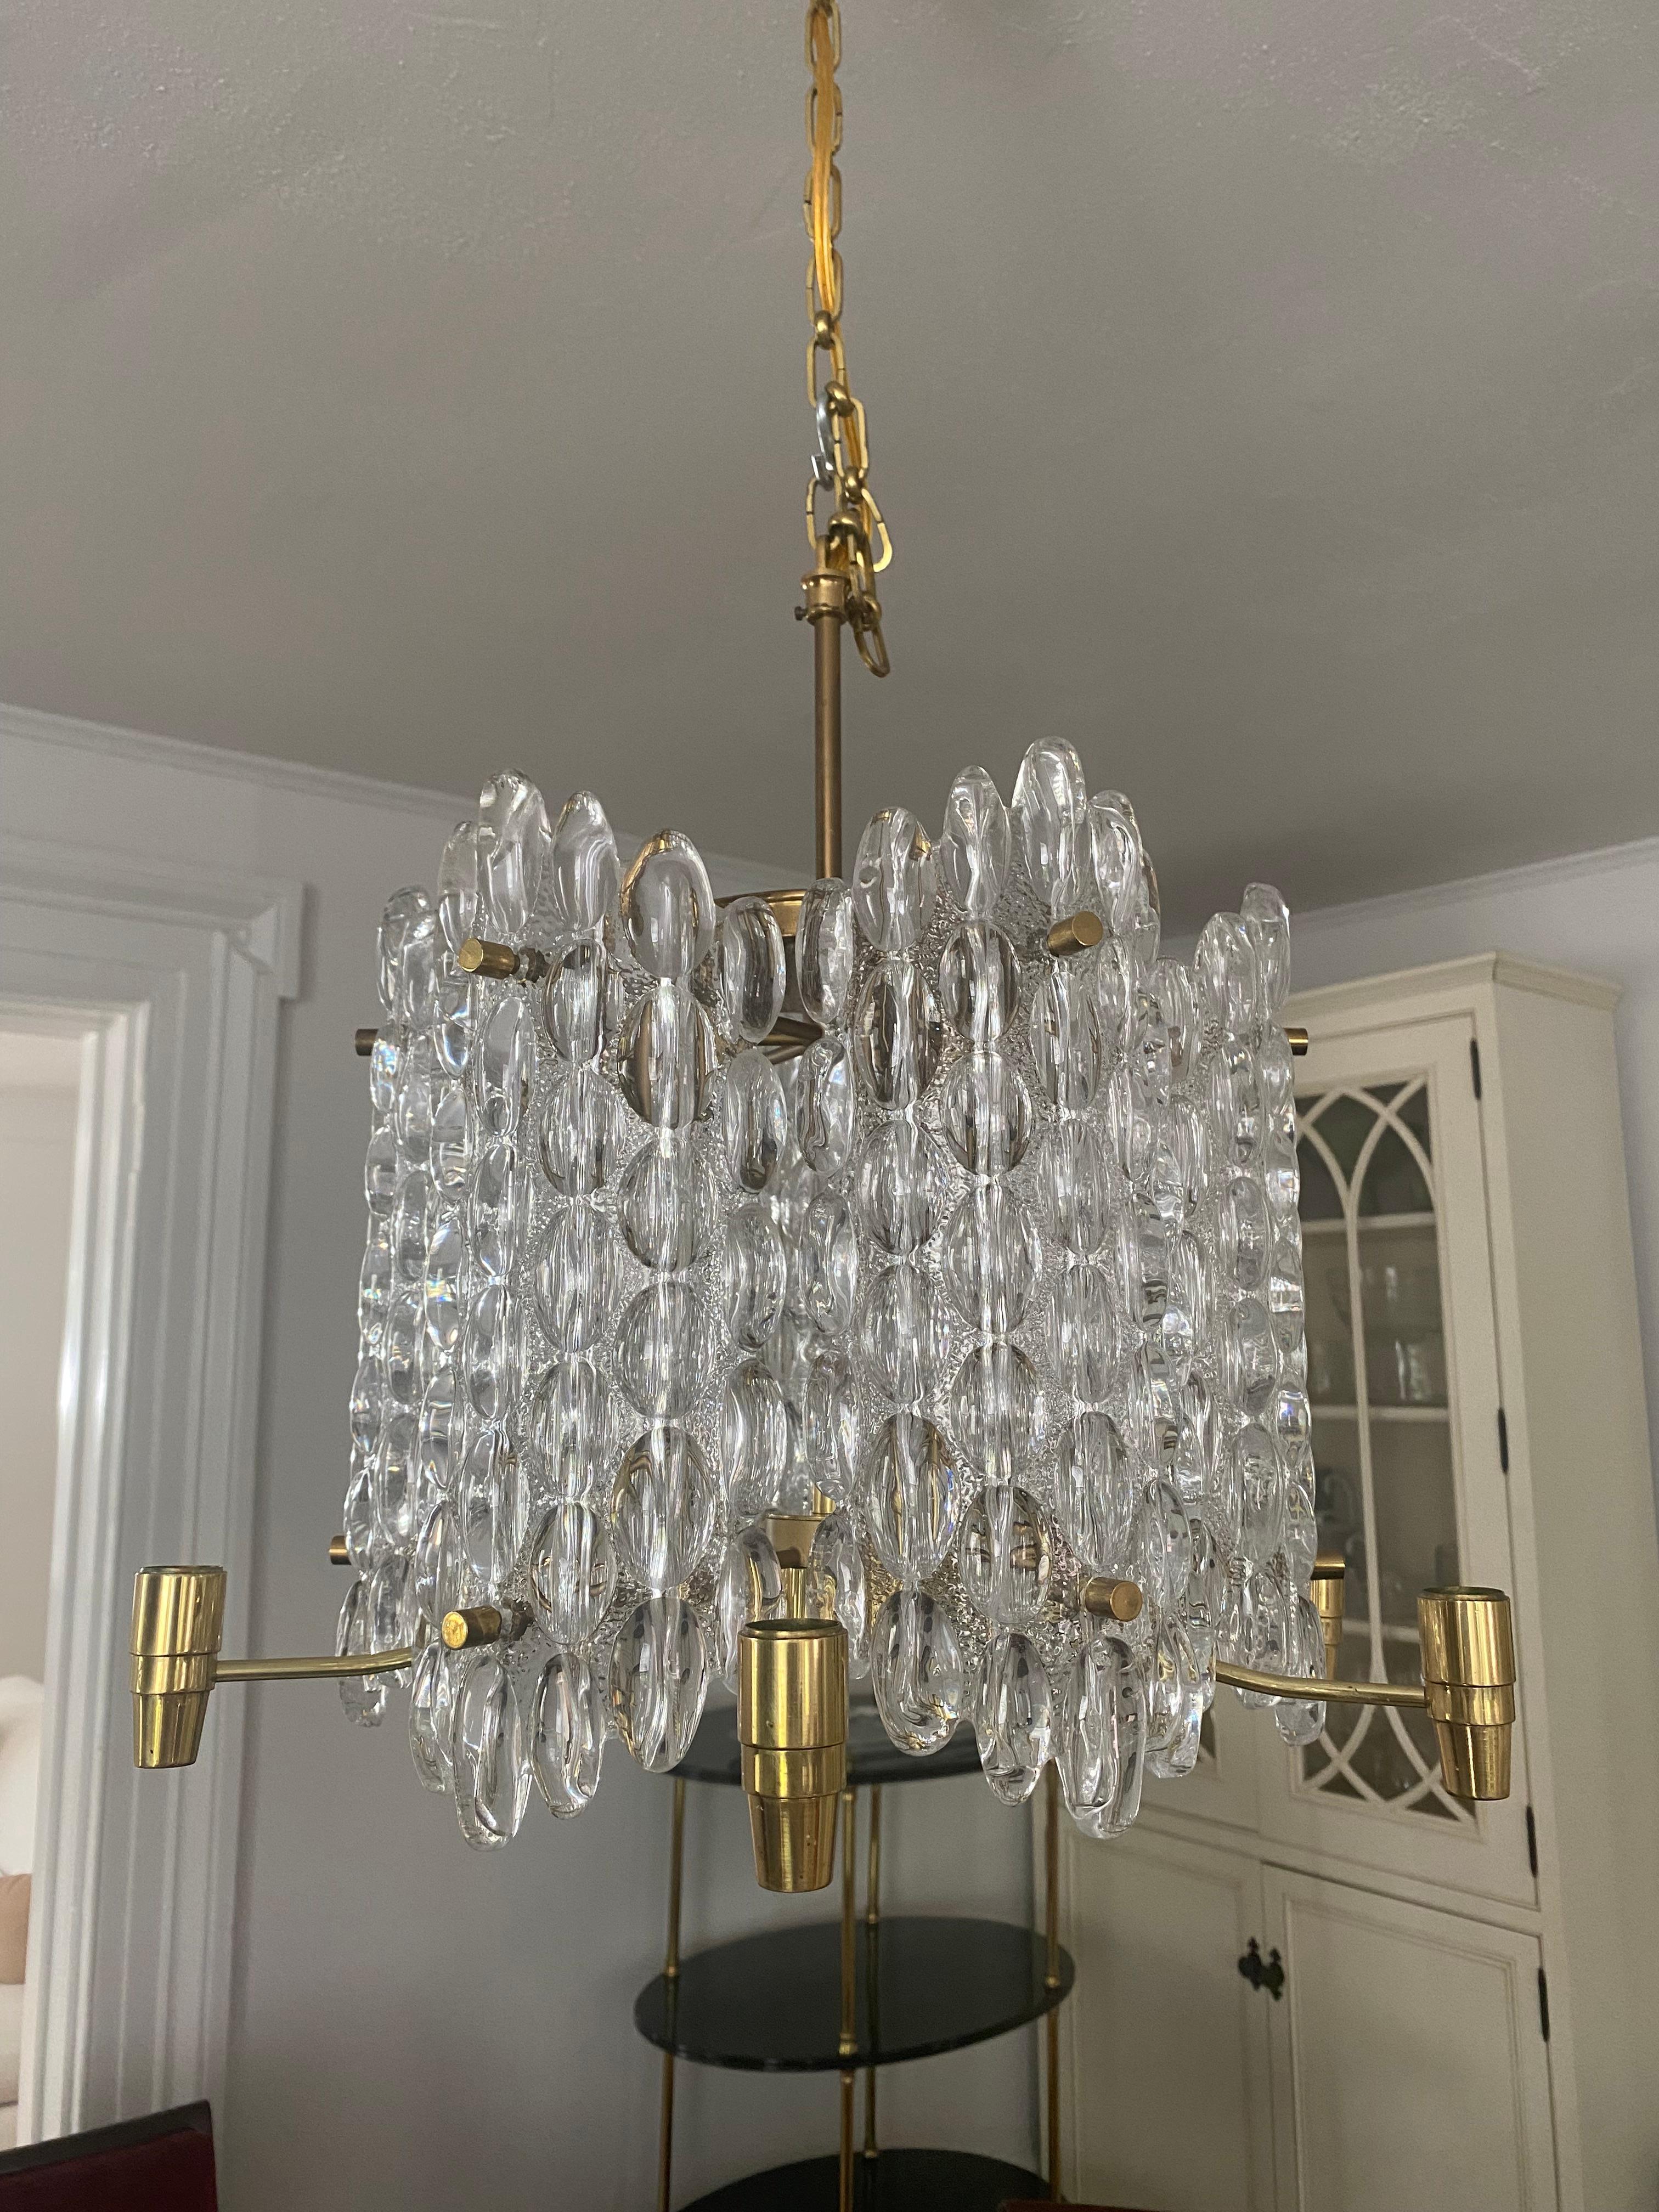 Carl Fagerlund for Orrefors crystal chandelier.
Six hanging panels with 6 candleholders.
Hanging dimensions can be adjusted.
Well crafted and heavy.

Comes apart for shipping.
Approx 16 diameter x 12 inches high.
